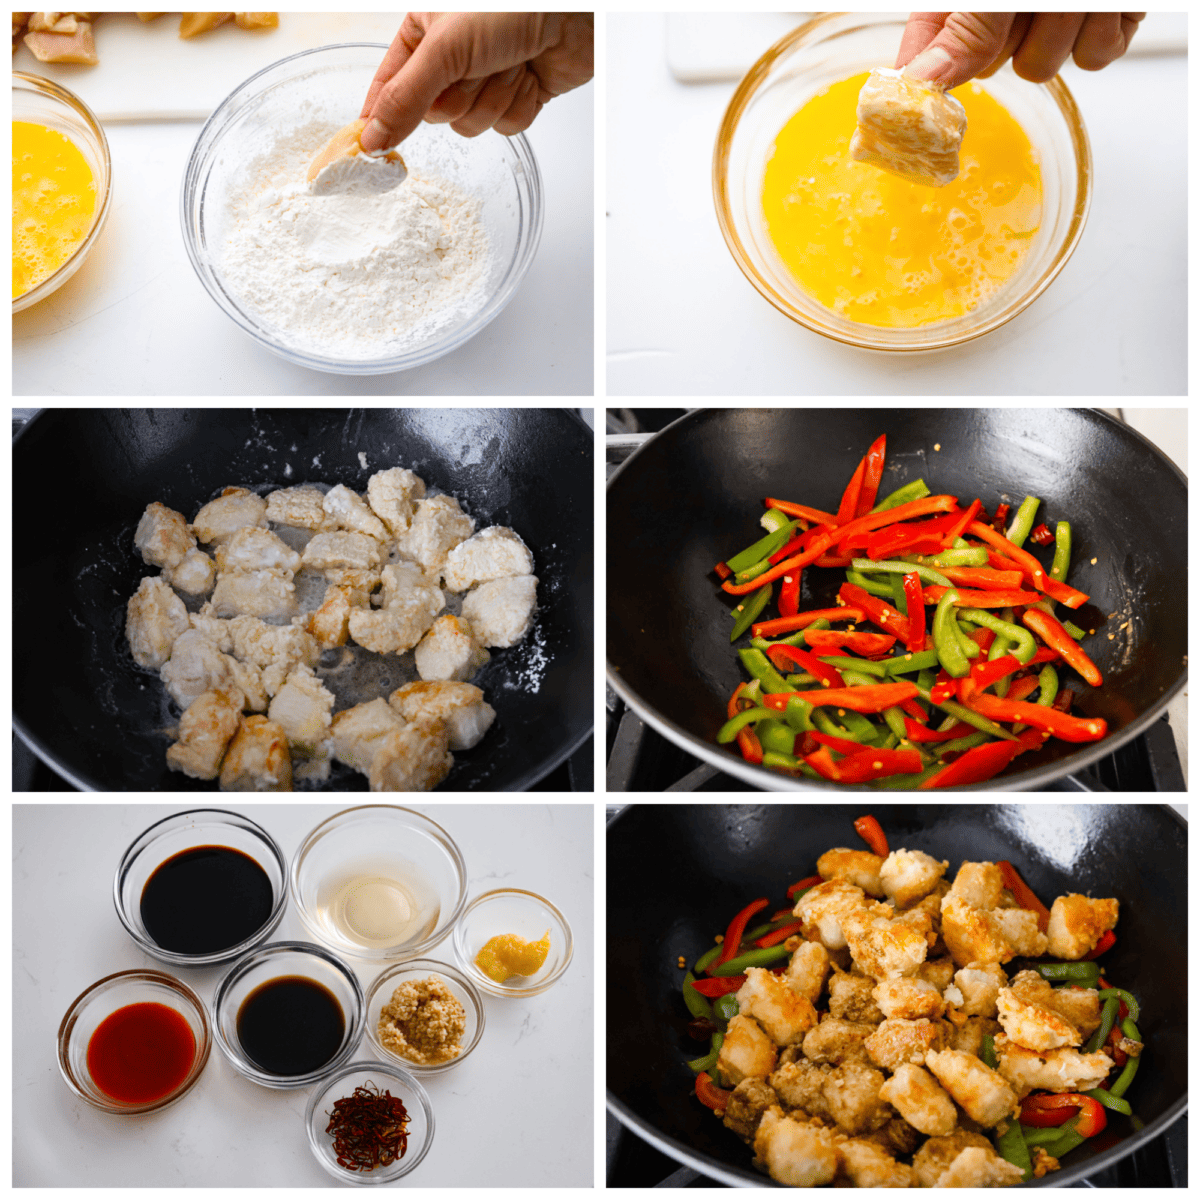 6-photo collage of the chicken, sauce, and stir fry being prepared.